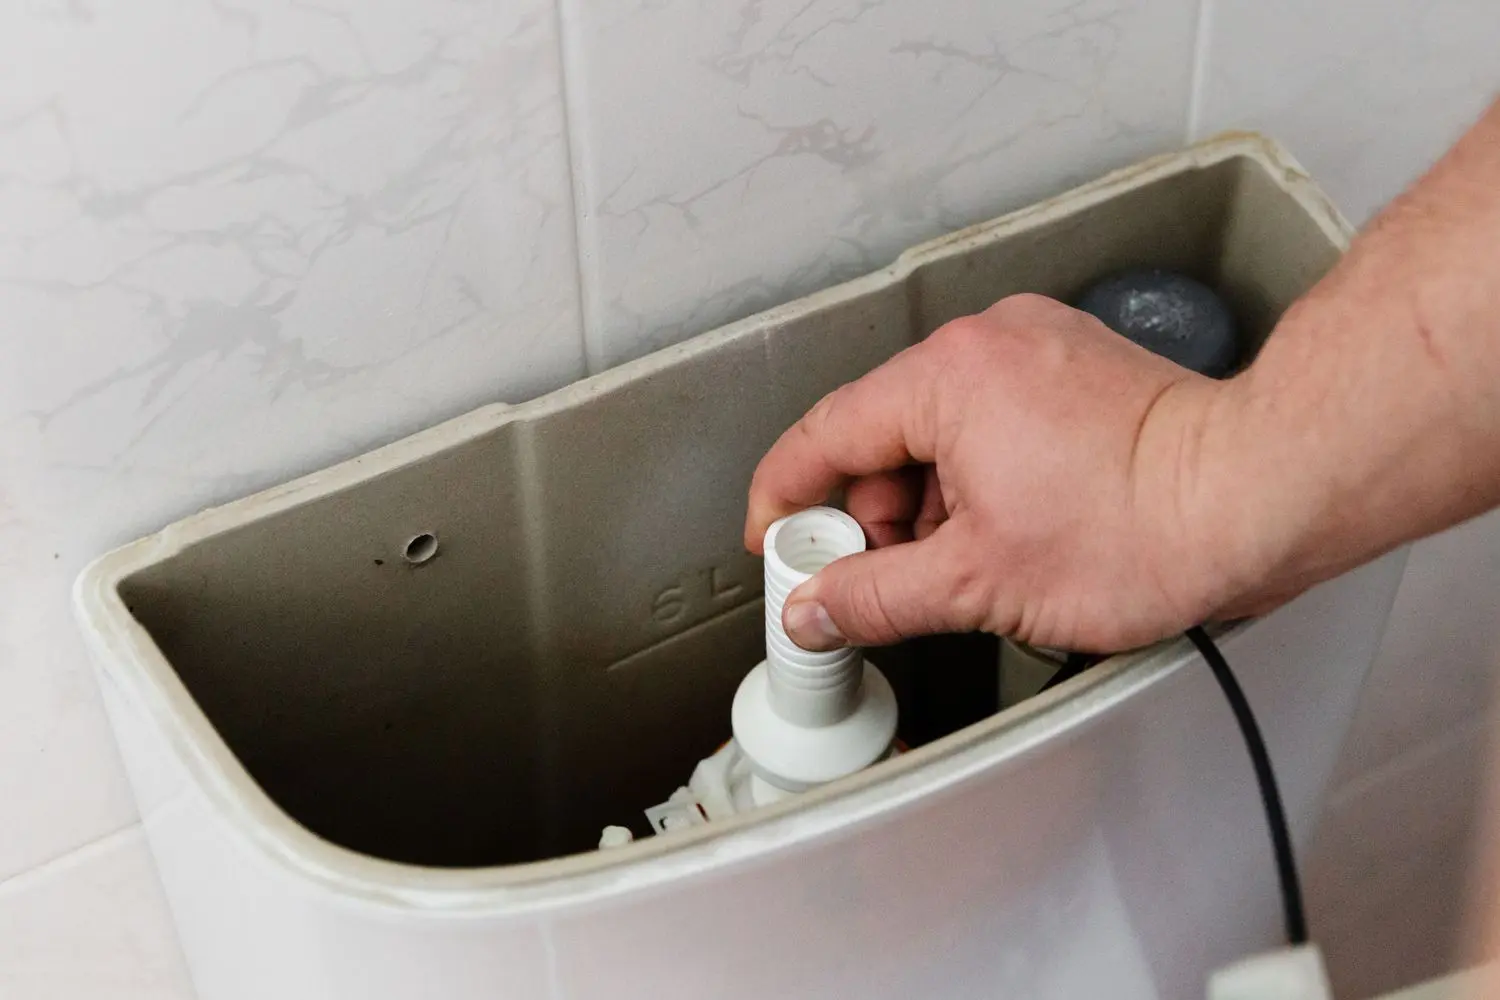 https://improvehome101.info/how-to-fix-toilet-flush-problems